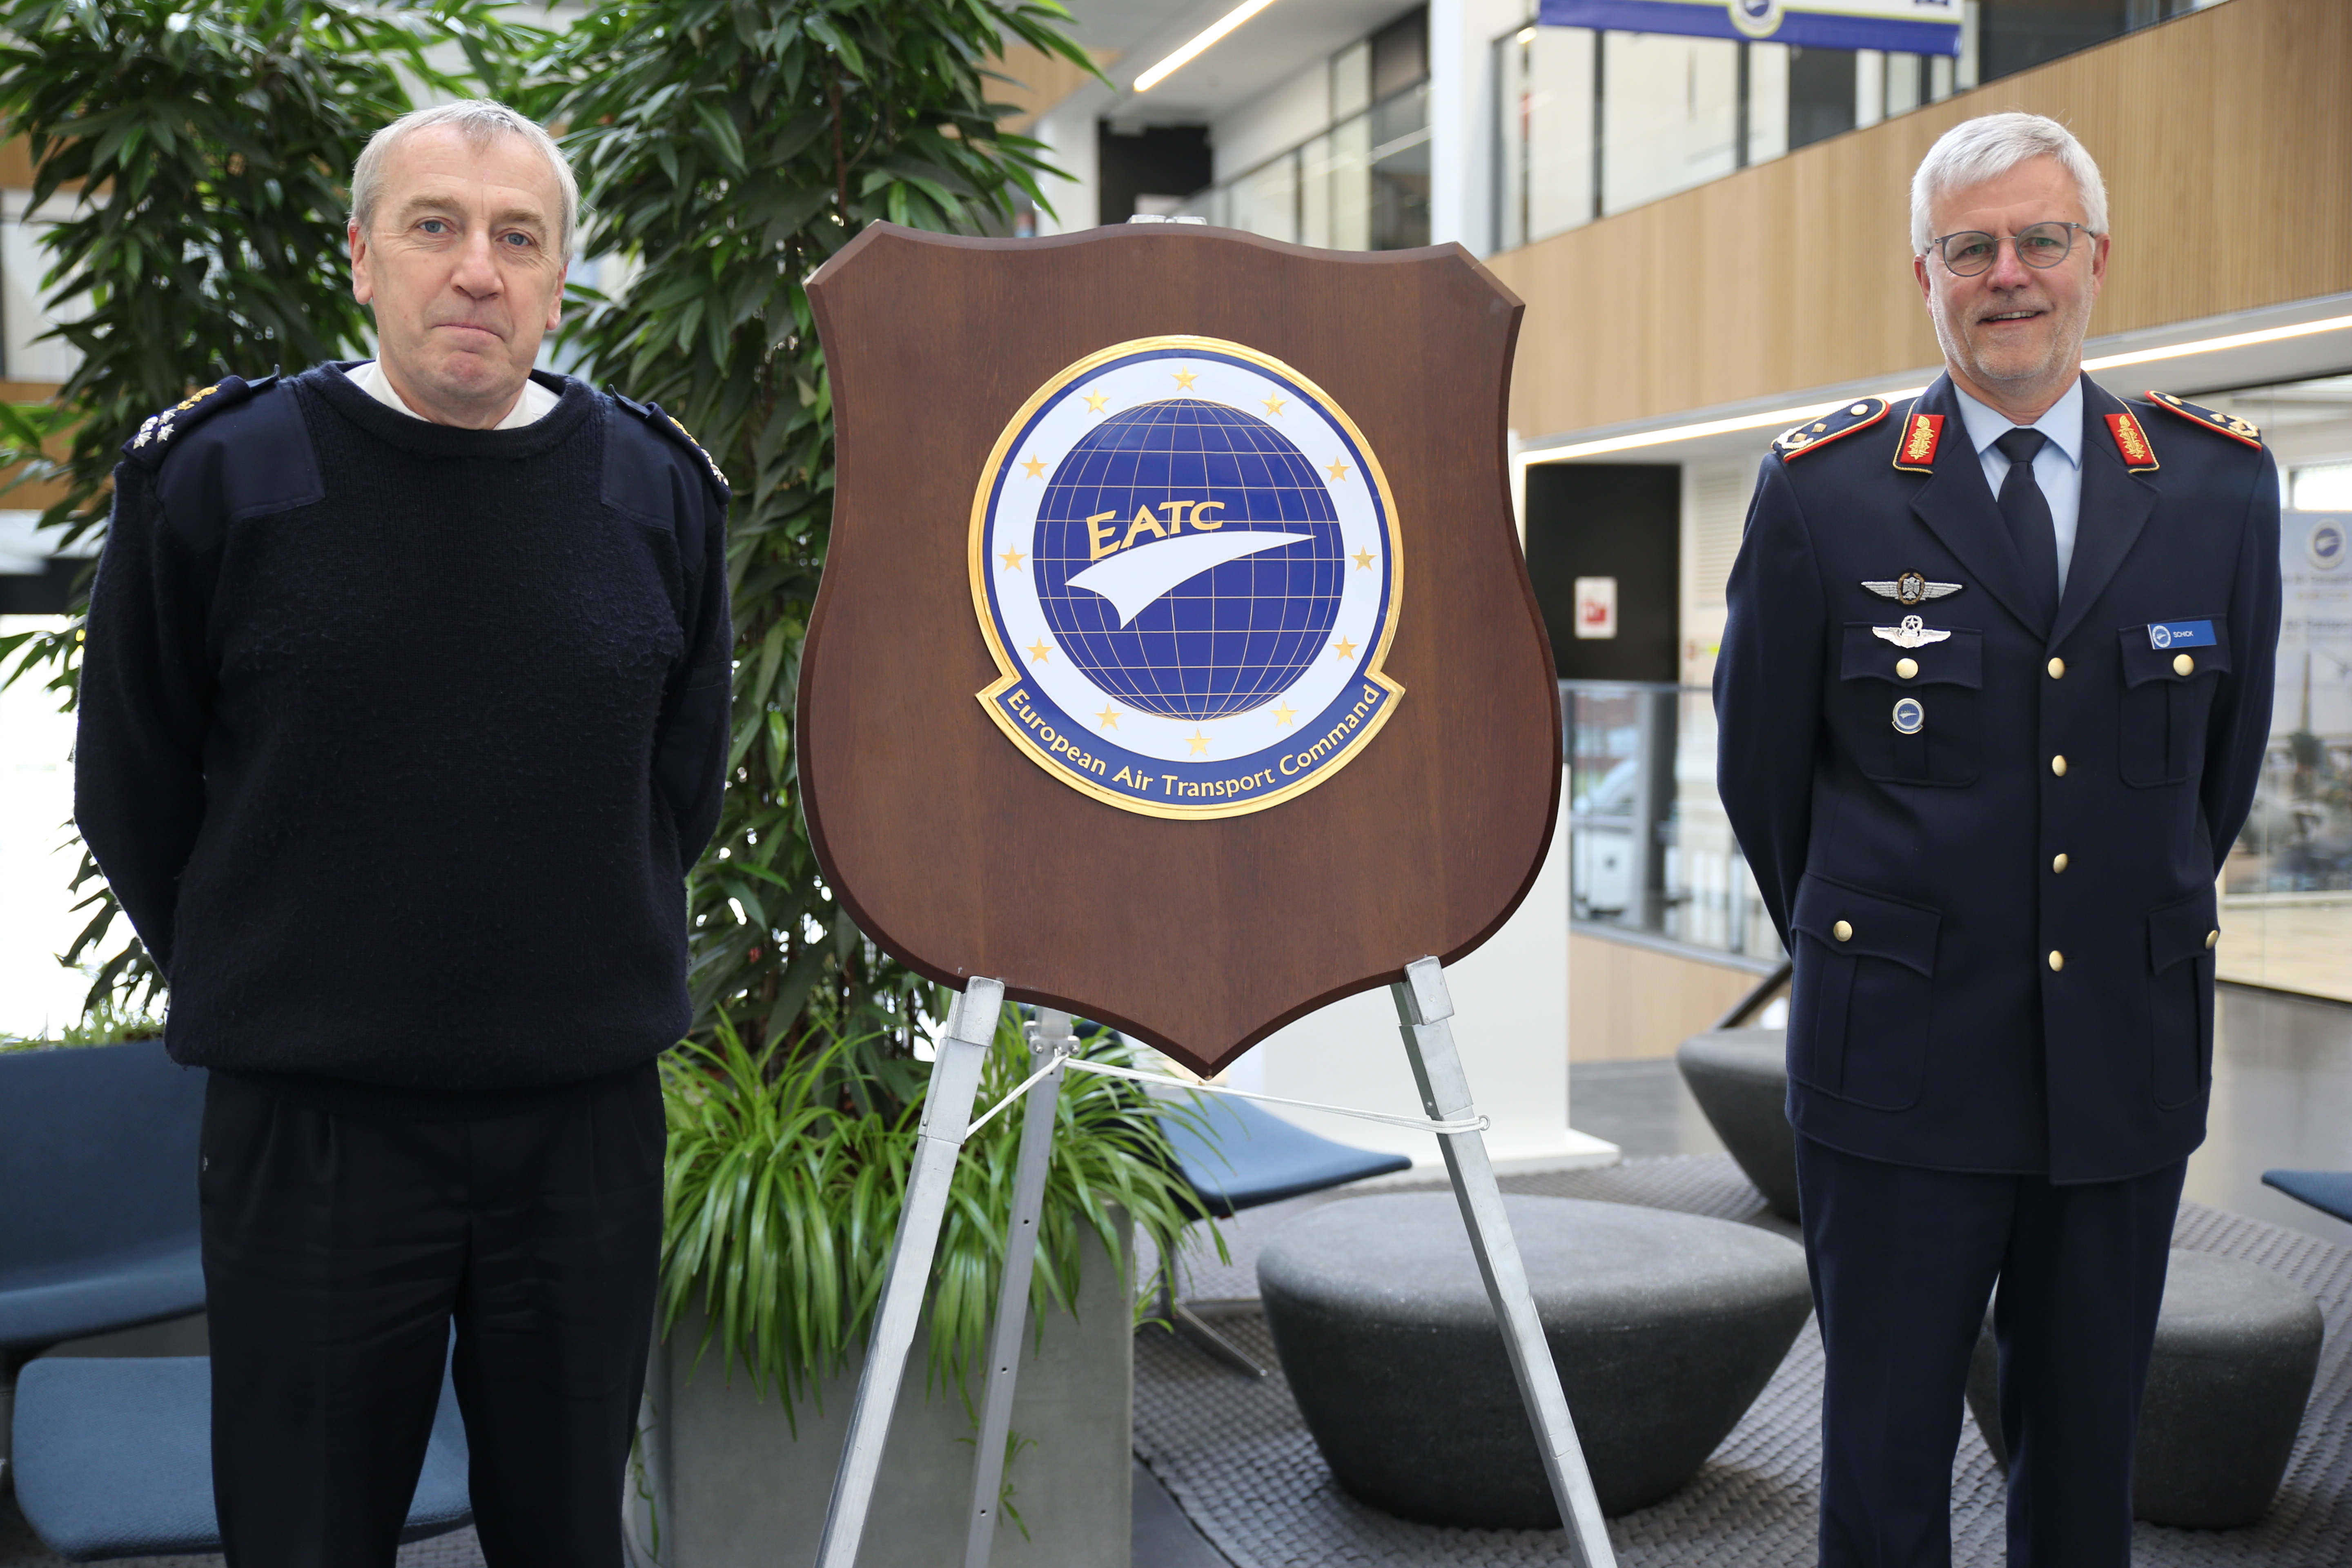 The Belgian Chief of Defense visits EATC